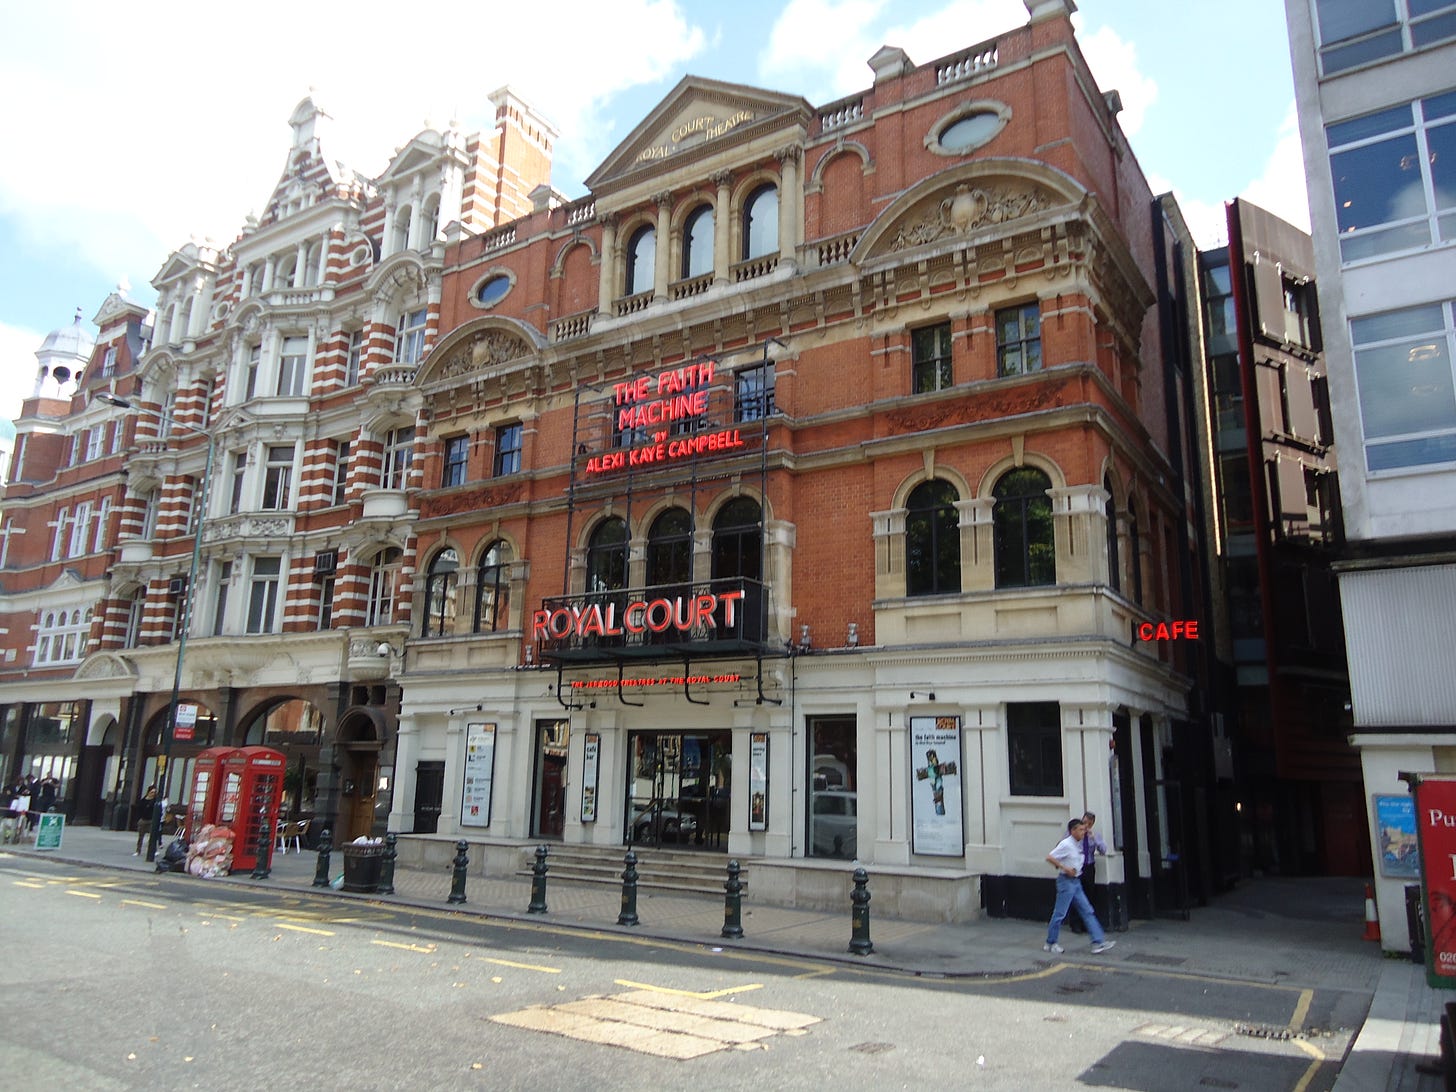 File:The Royal Court theatre, Sloane Square - geograph.org.uk - 2581033.jpg  - Wikimedia Commons